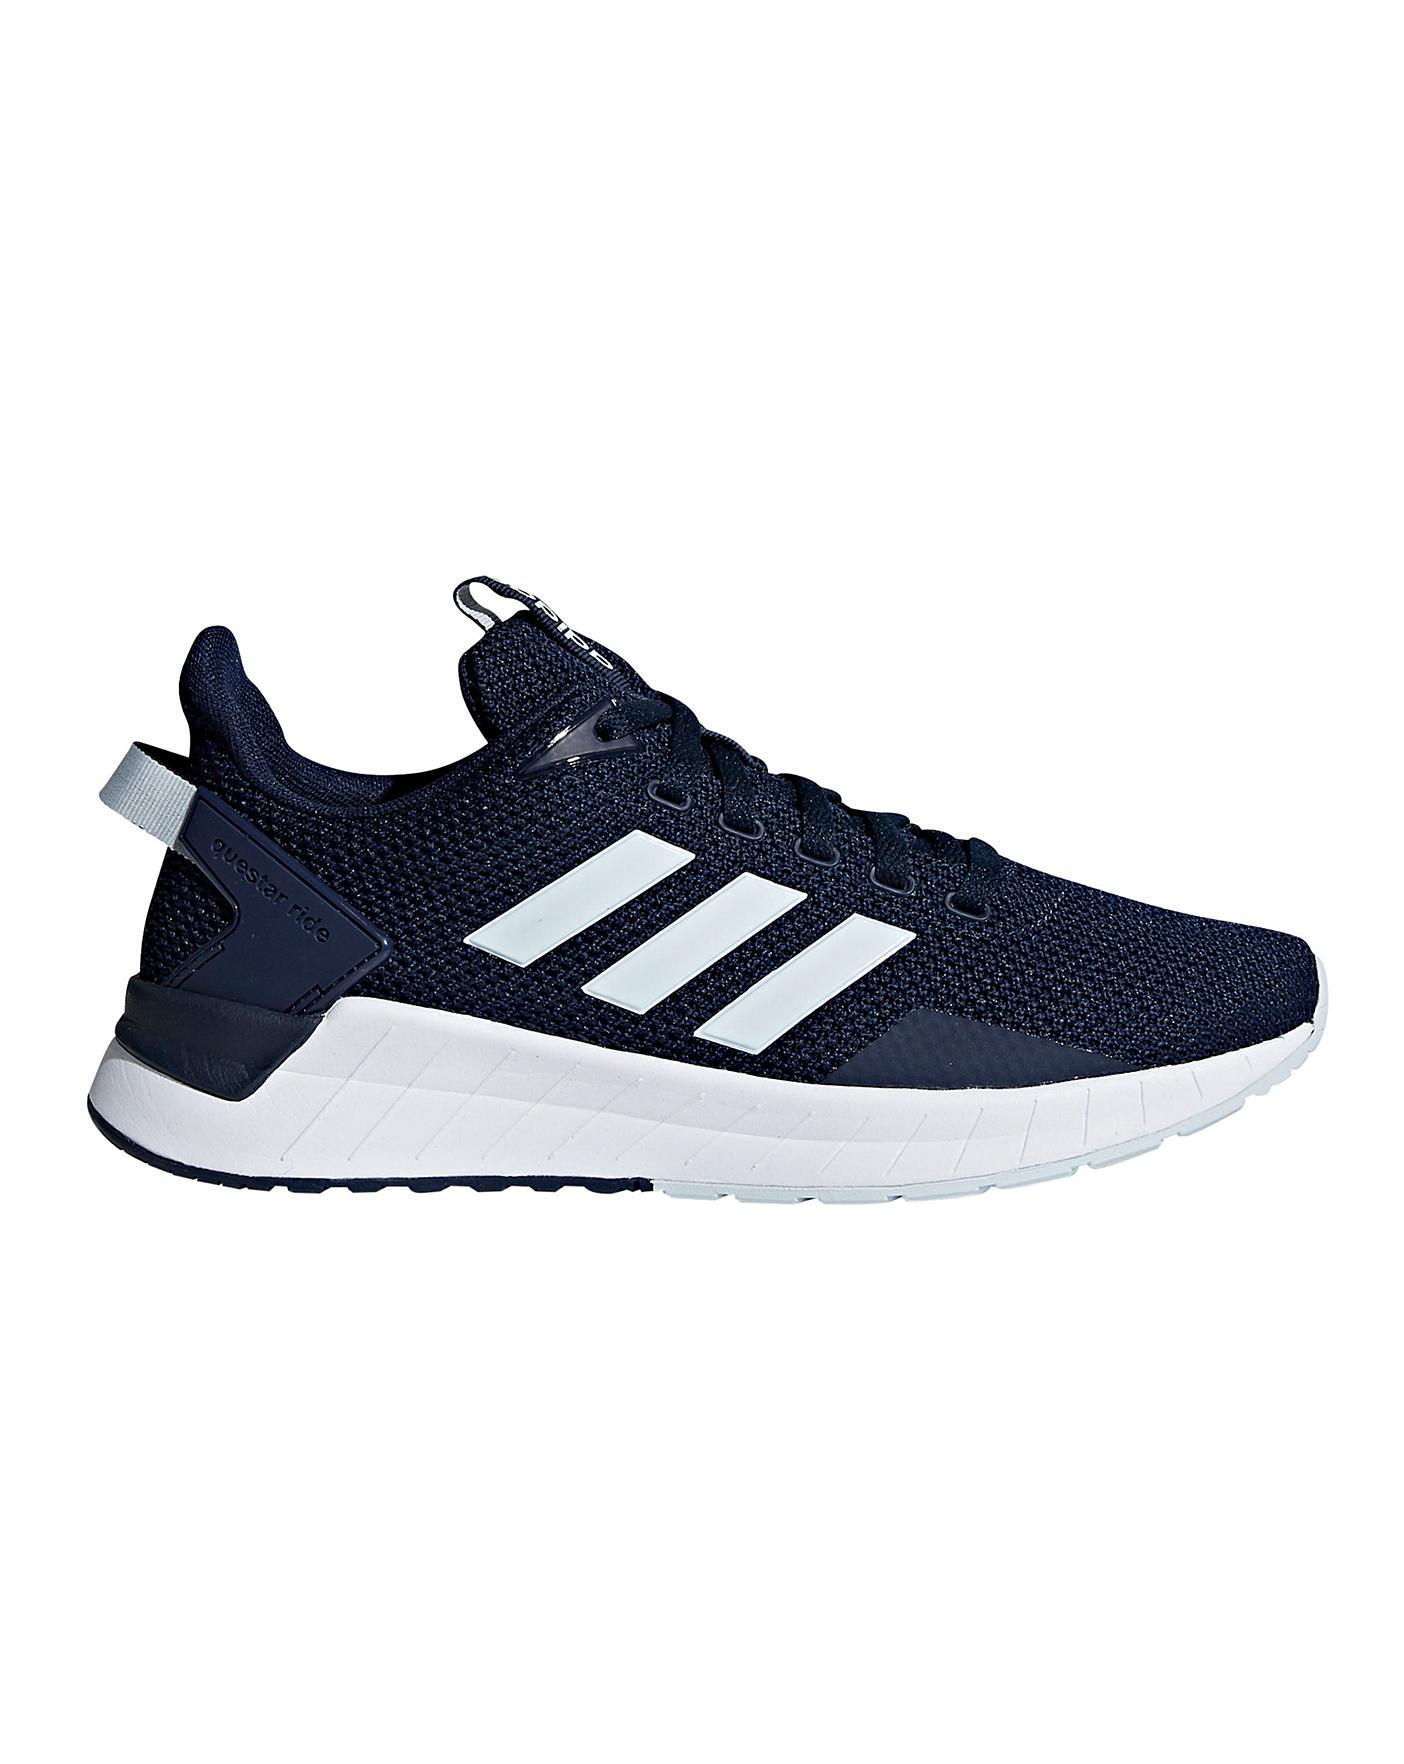 adidas questar ride ladies trainers review